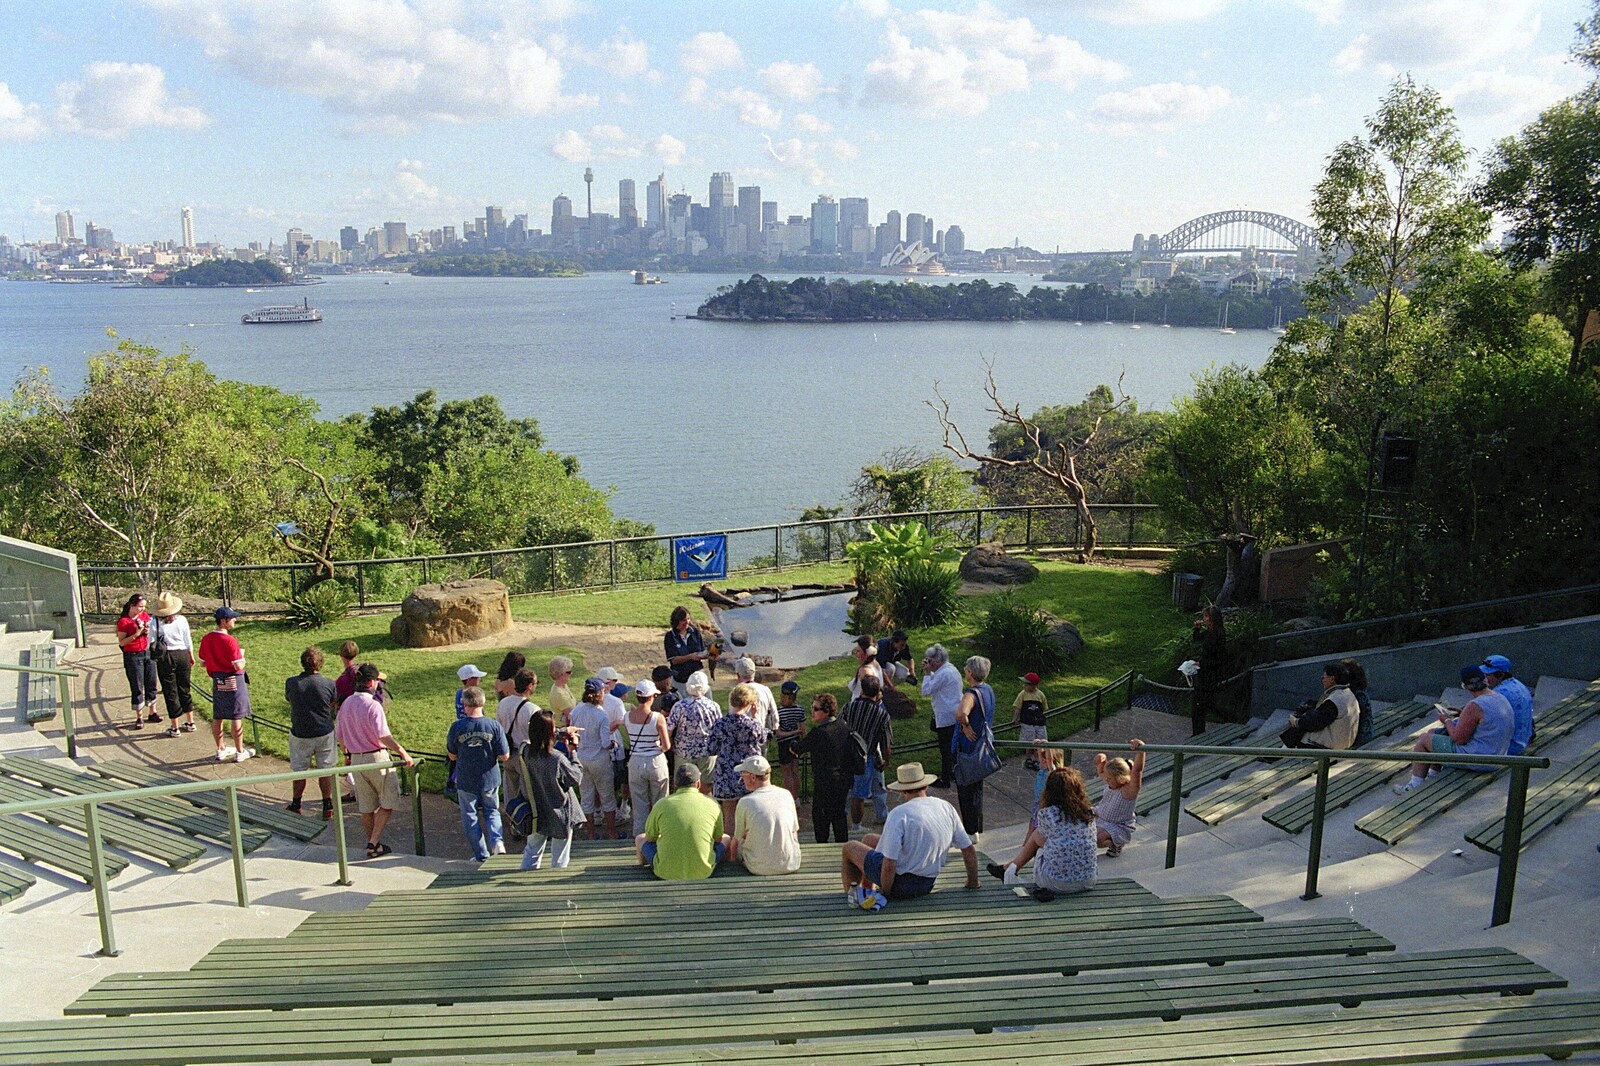 The crowds gather for a bird demo from A Trip to the Zoo, Sydney, Australia - 7th April 2000